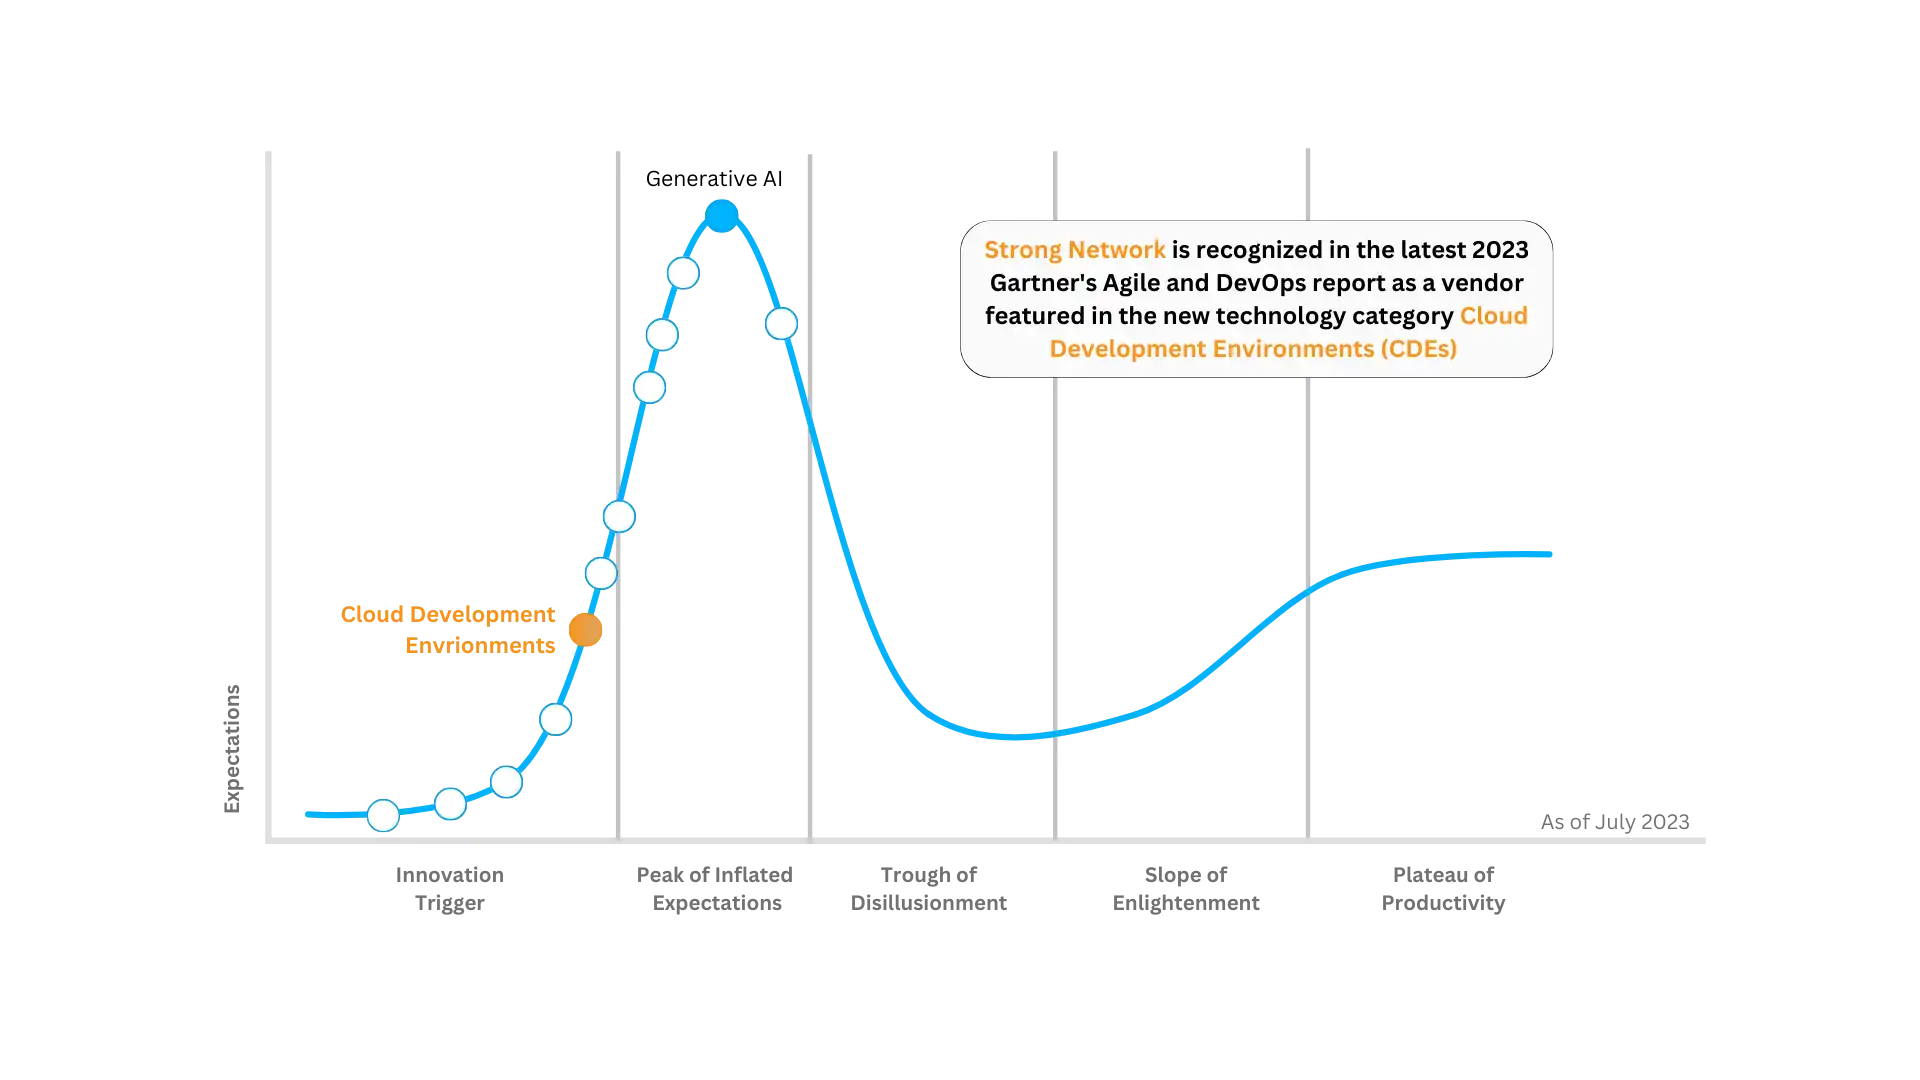 Gartner Hype Cycle for Agile and DevOps, 2023 with the positioning of Cloud Development Environments.